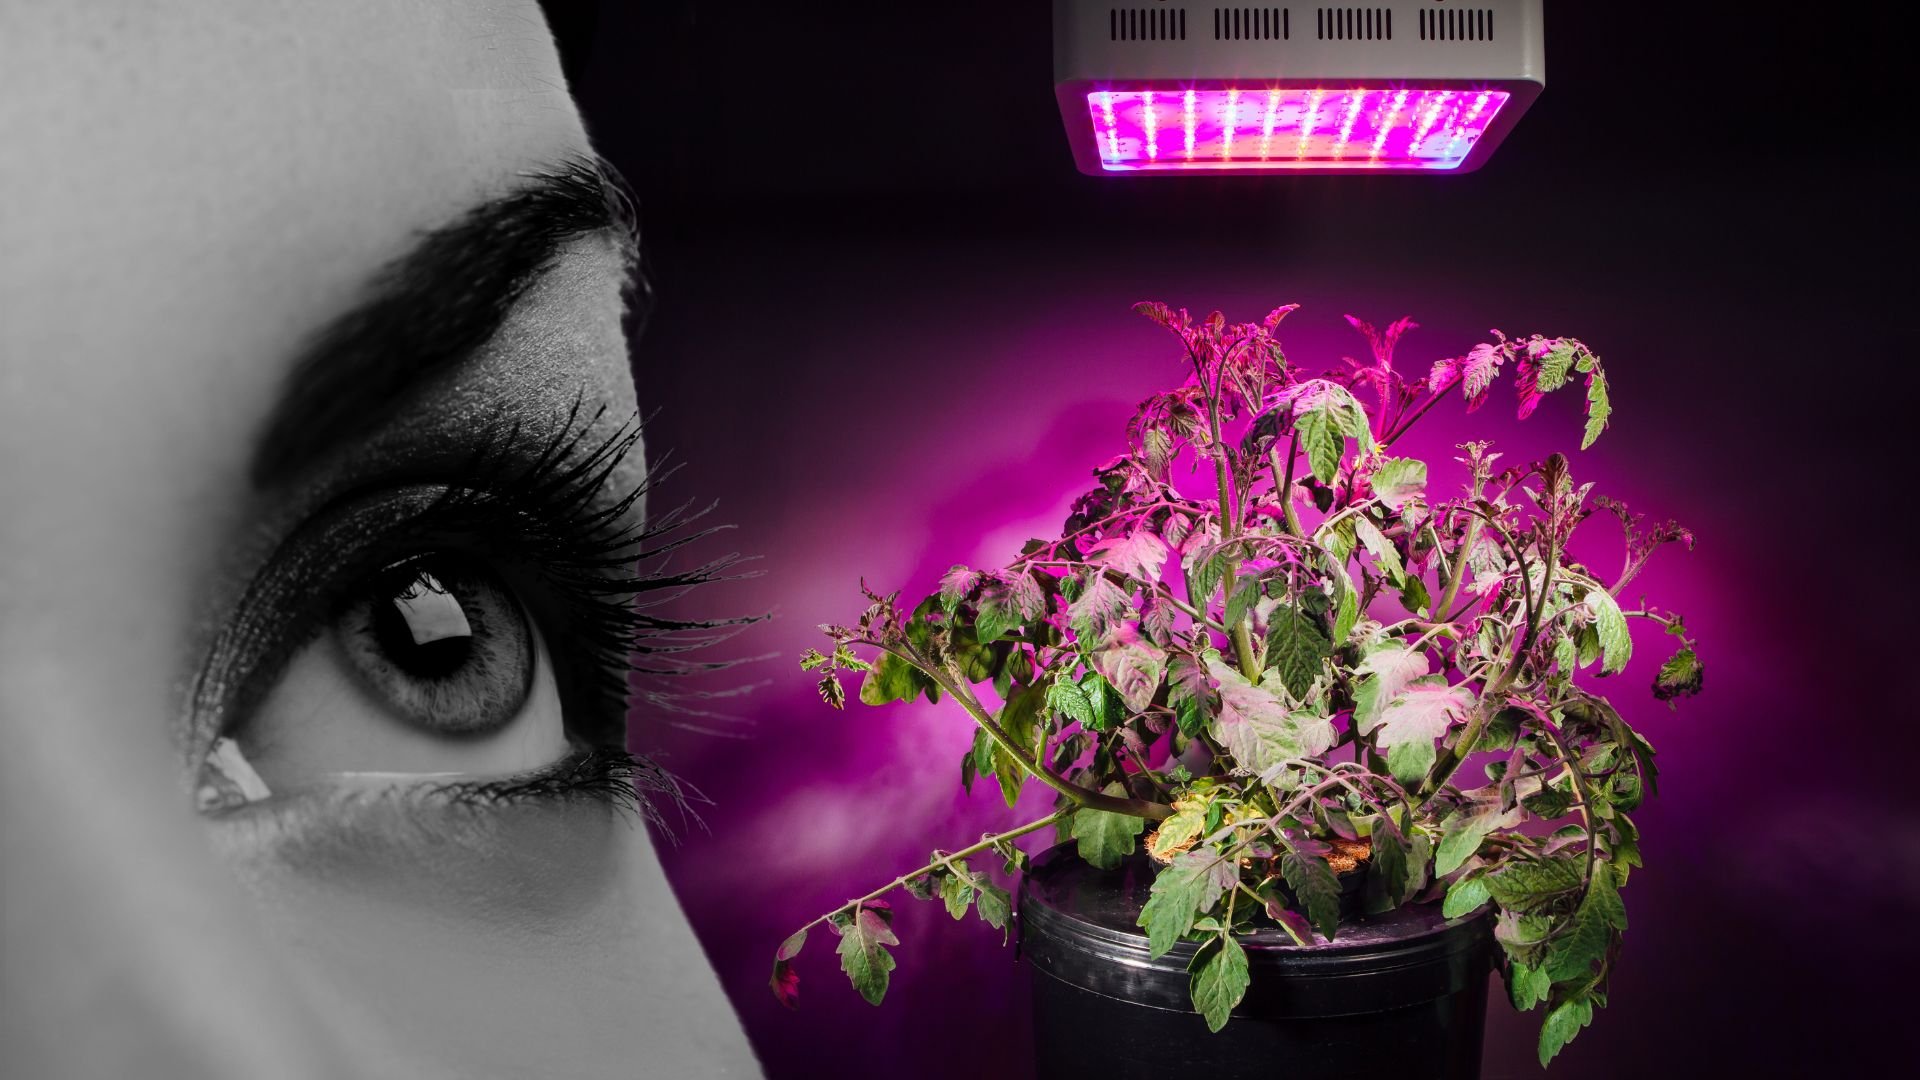 % In this blog post, we will explore the potential dangers of LED grow lights and answer the question: can LED grow lights cause eye damage?